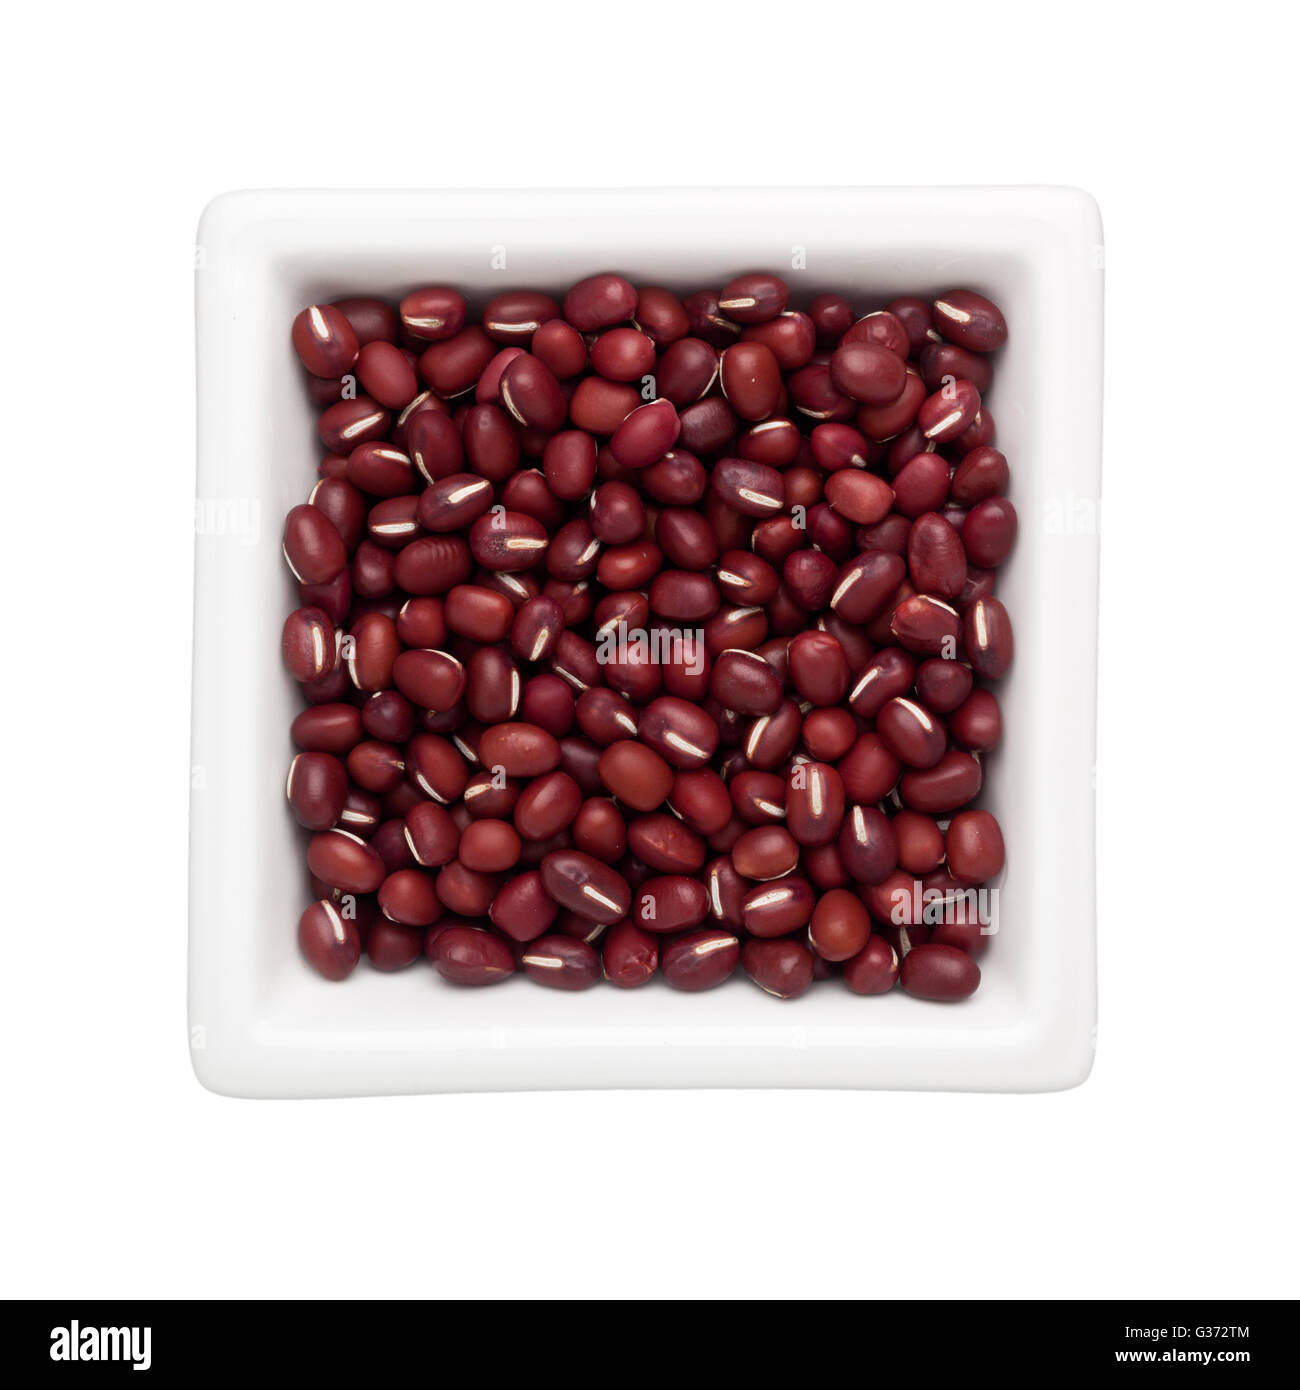 Adzuki beans in a square bowl isolated on white background Stock Photo